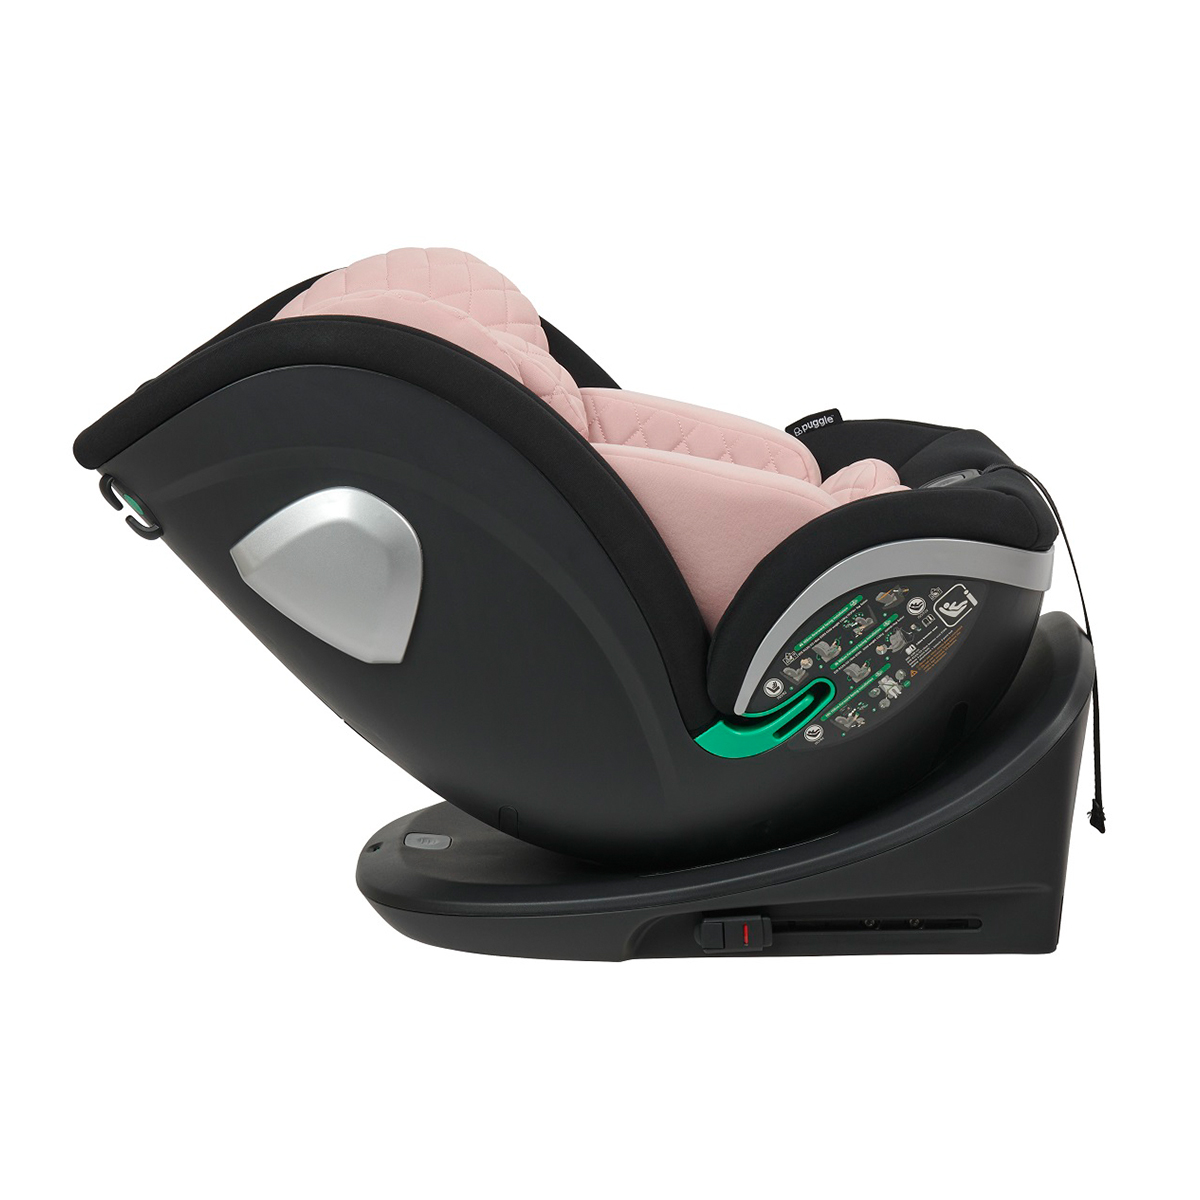 Puggle_iSize_ Safe_Max_Luxe_Car_Seat_Pink